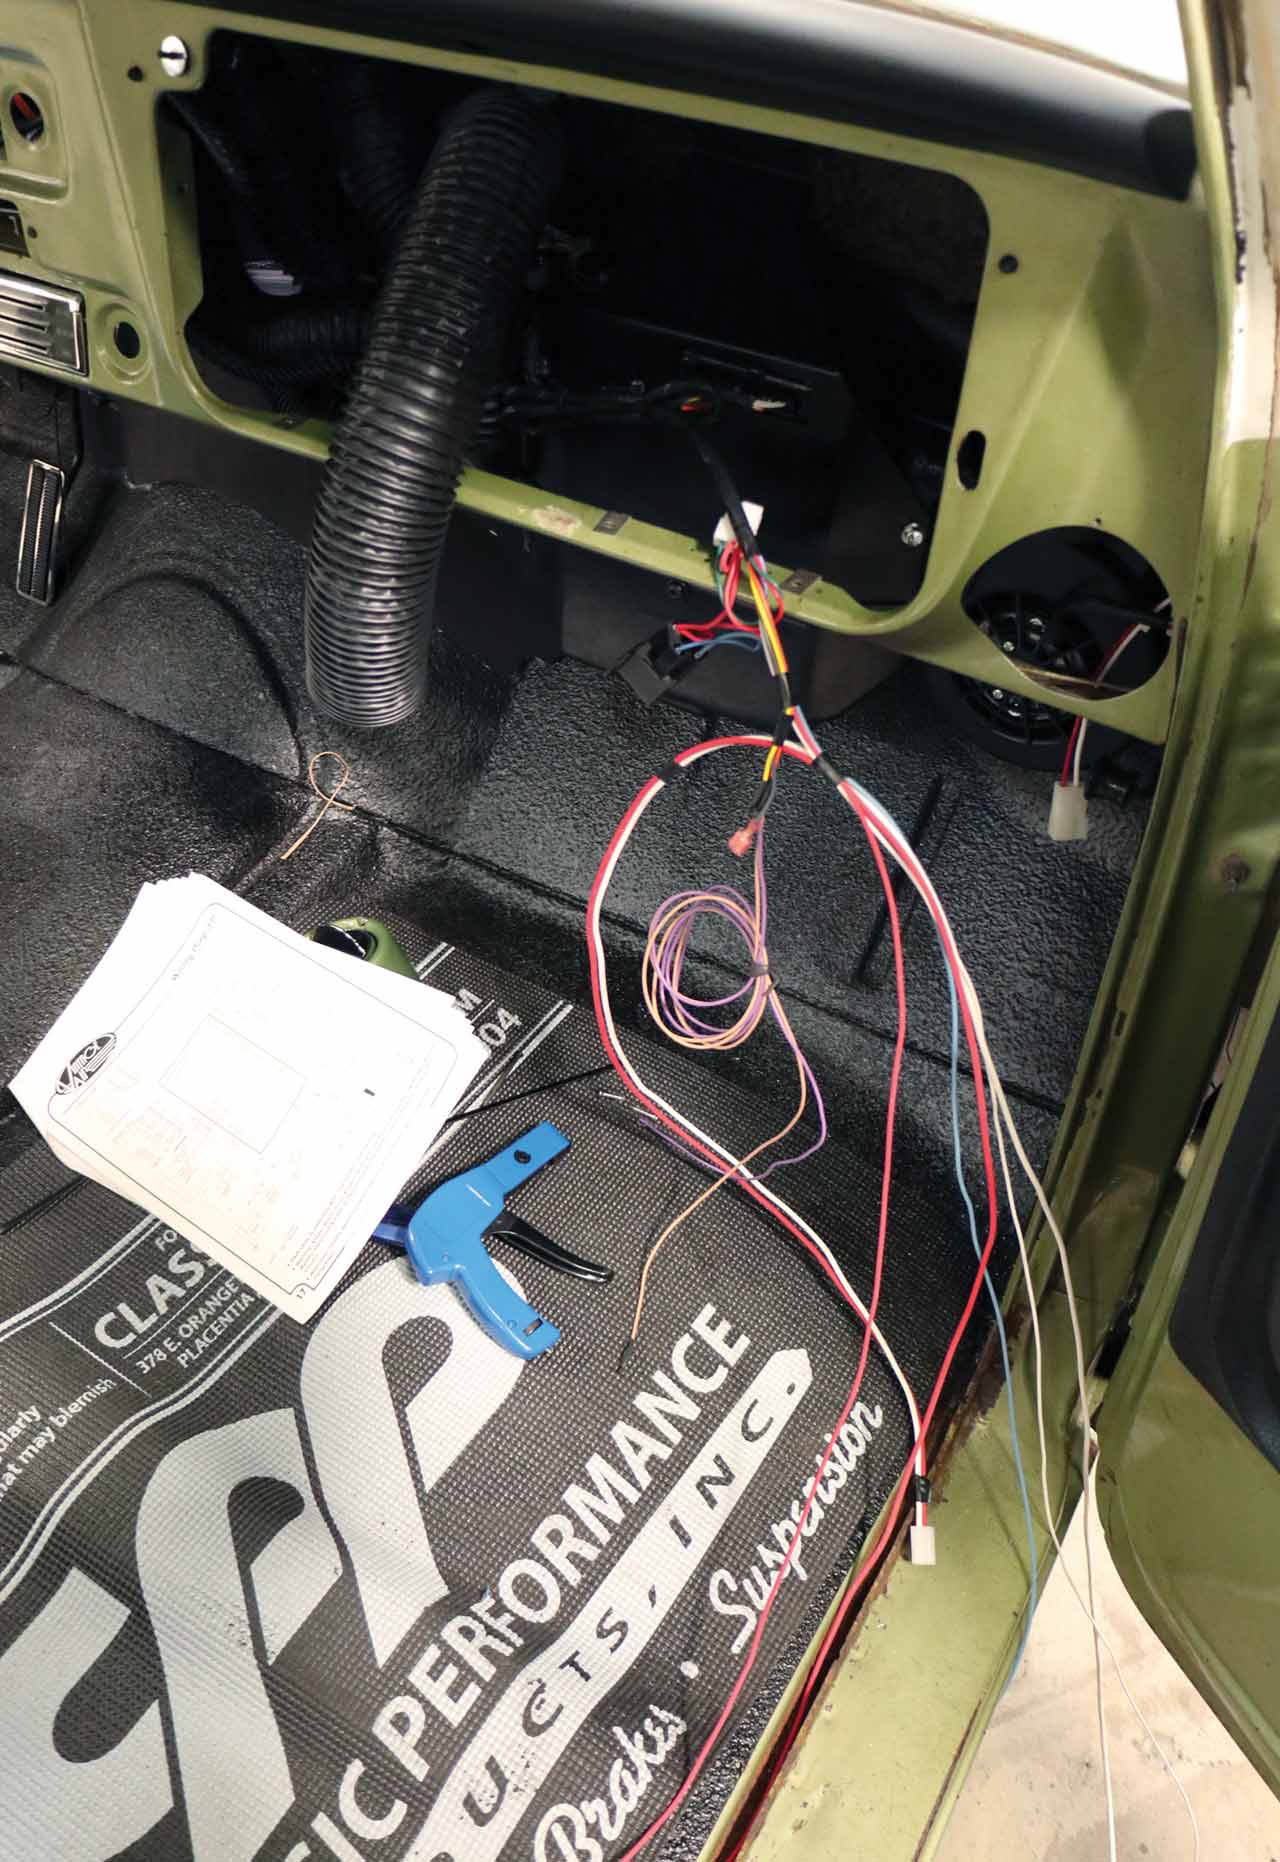 The necessary wiring harness components come over-length